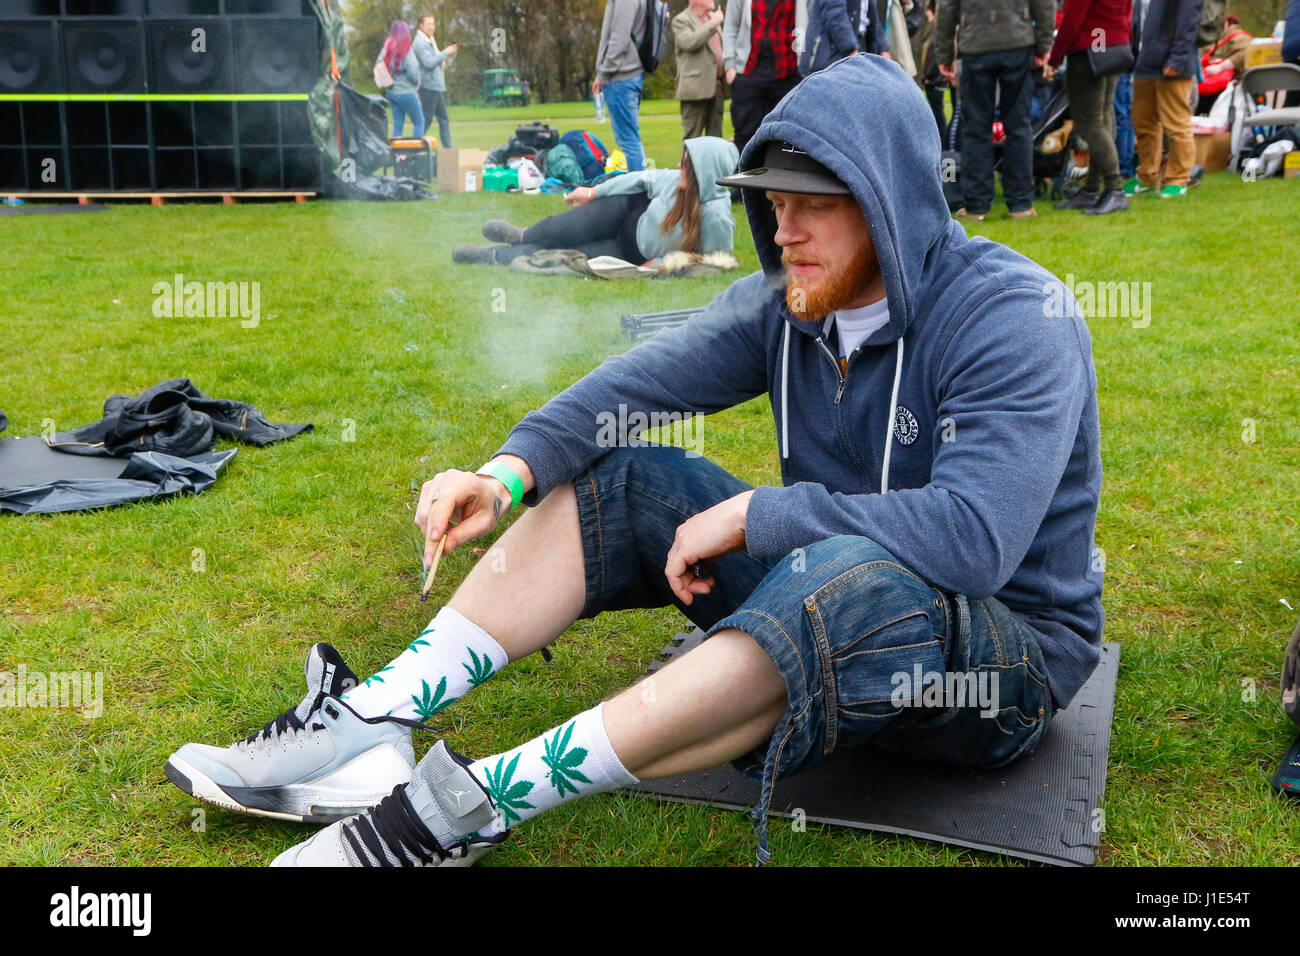 Glasgow, Scotland, UK. 20th April, 2017. On the sixth annual cannabis gathering organised by 'Glasgow Cannabis Social Club', several hundred supporters turned out at Glasgow Green in the city centre, to take part in the event, organised to coincide with 420 Hempstock (named so, because all cannabis users and supporters should light up at 4.20pm on this day). As well as this event in Glasgow, similar had been organised for London, Durham, Leeds and Derry with planned music festivals, live bands and public speakers. Credit: Findlay/Alamy Live News Stock Photo